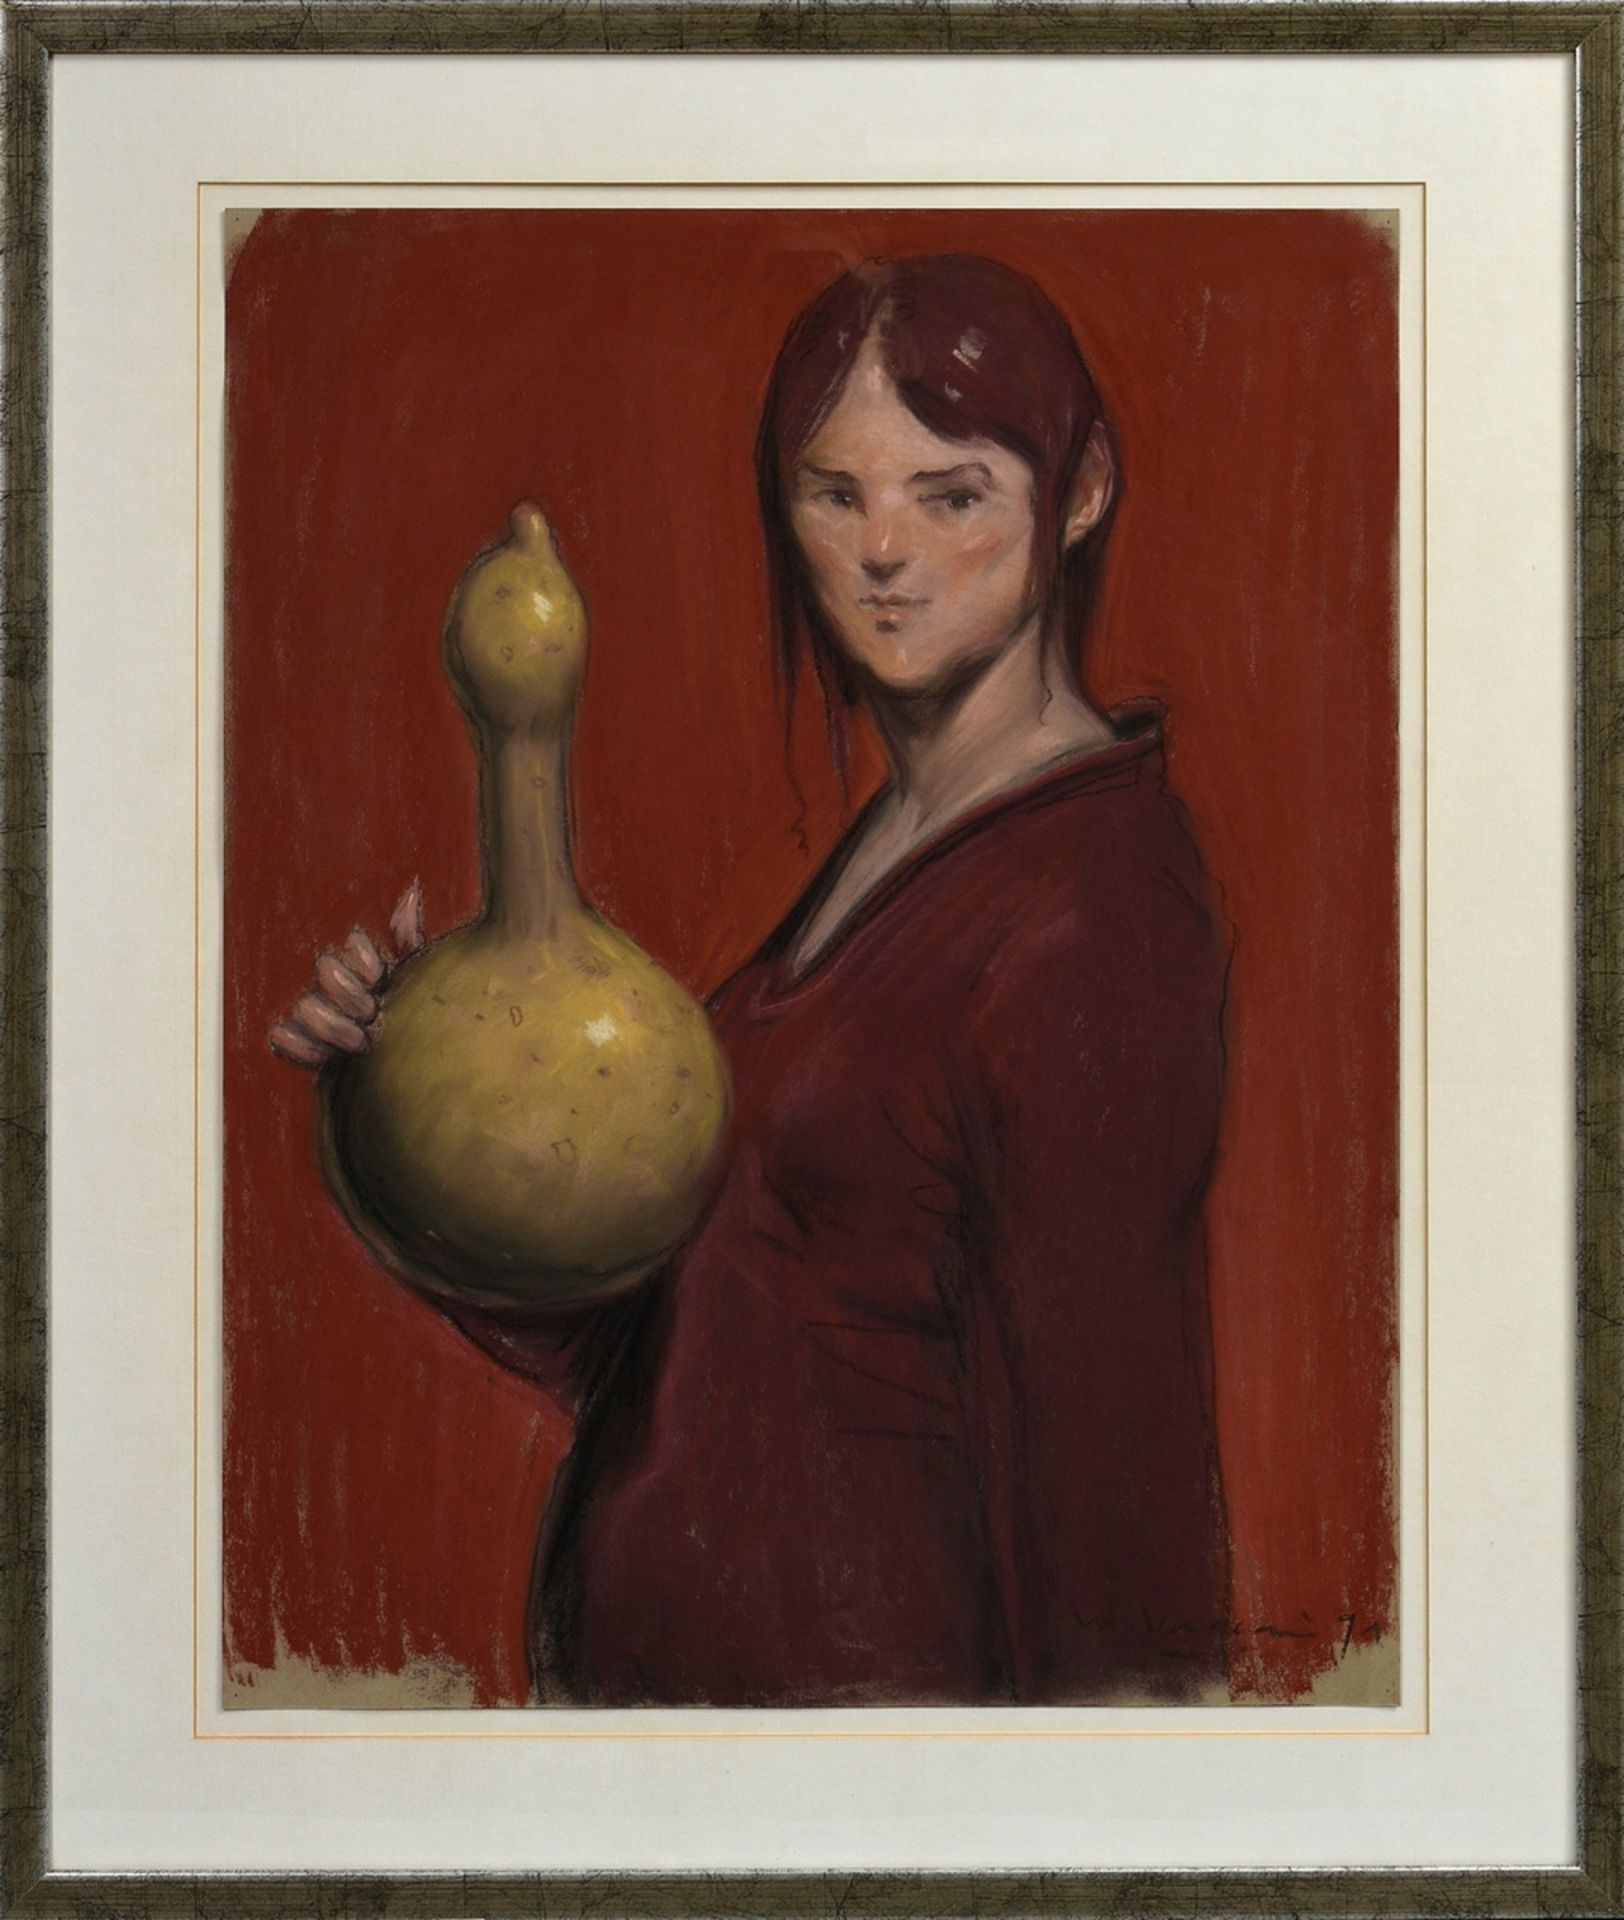 Vaccari, Wainer (*1949) "The Pumpkin of Velázquez" (portrait of a lady) 1991, pastel chalk/charcoal - Image 2 of 4